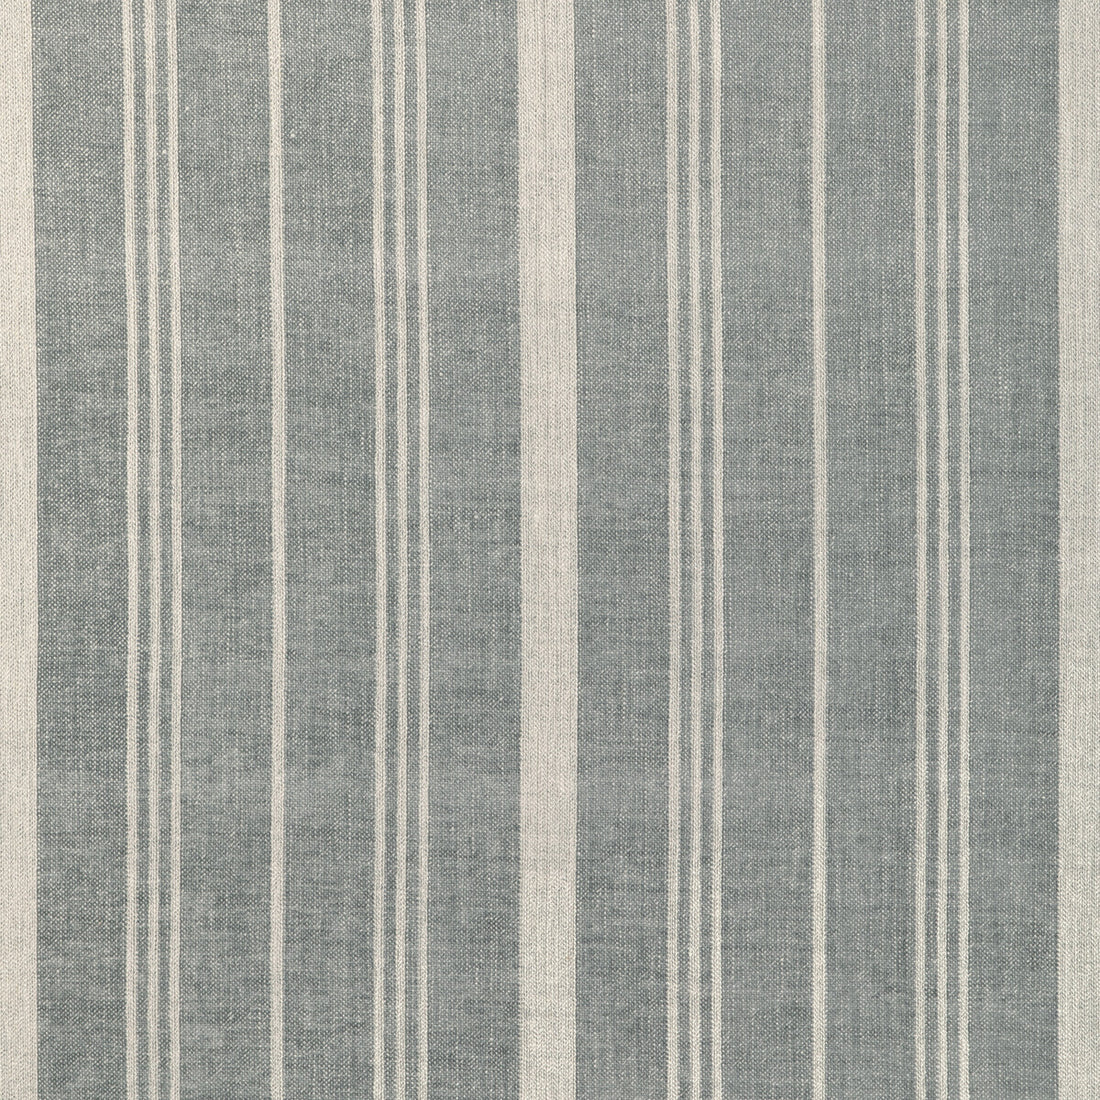 Furrow Stripe fabric in sky color - pattern 36902.15.0 - by Kravet Couture in the Atelier Weaves collection